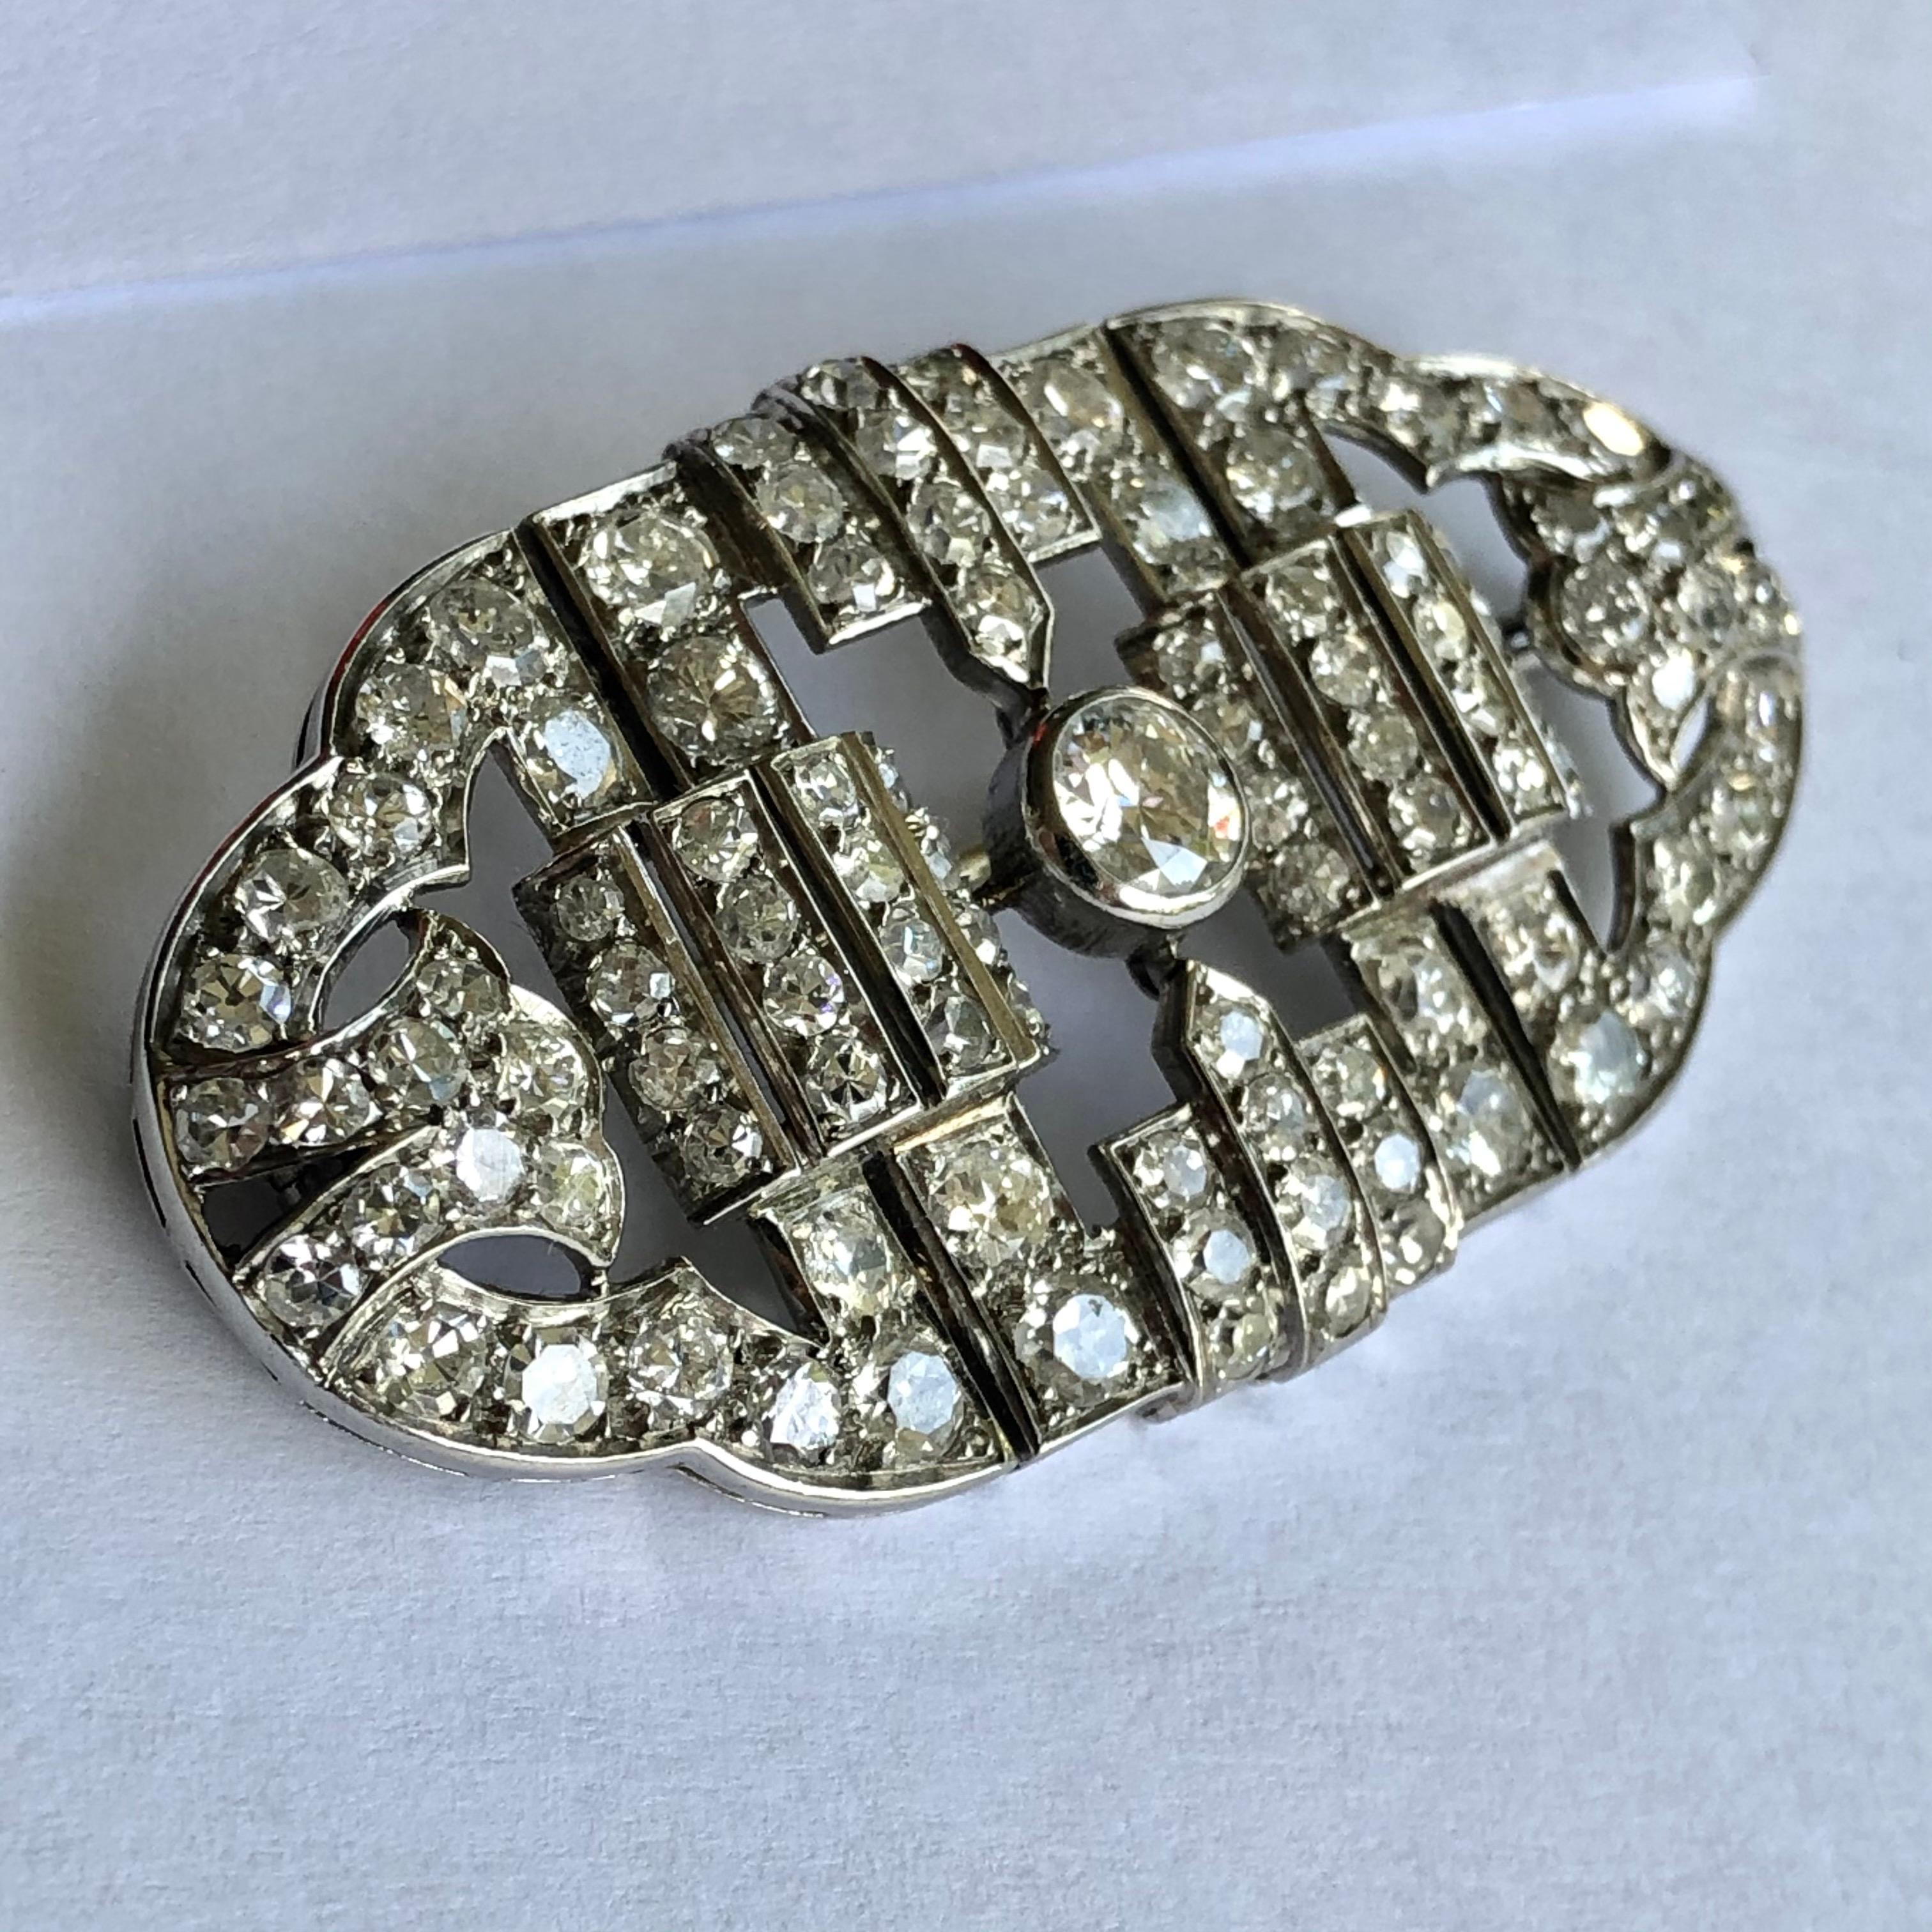 Stunning platinum Art Deco diamond brooch, circa 1930's -1940's, with around 6cts of diamonds including a 0.5ct central round diamond. Lovely addition to any avid collector's collection.

4.8cm in length, safety pin with 'trombone' clasp.